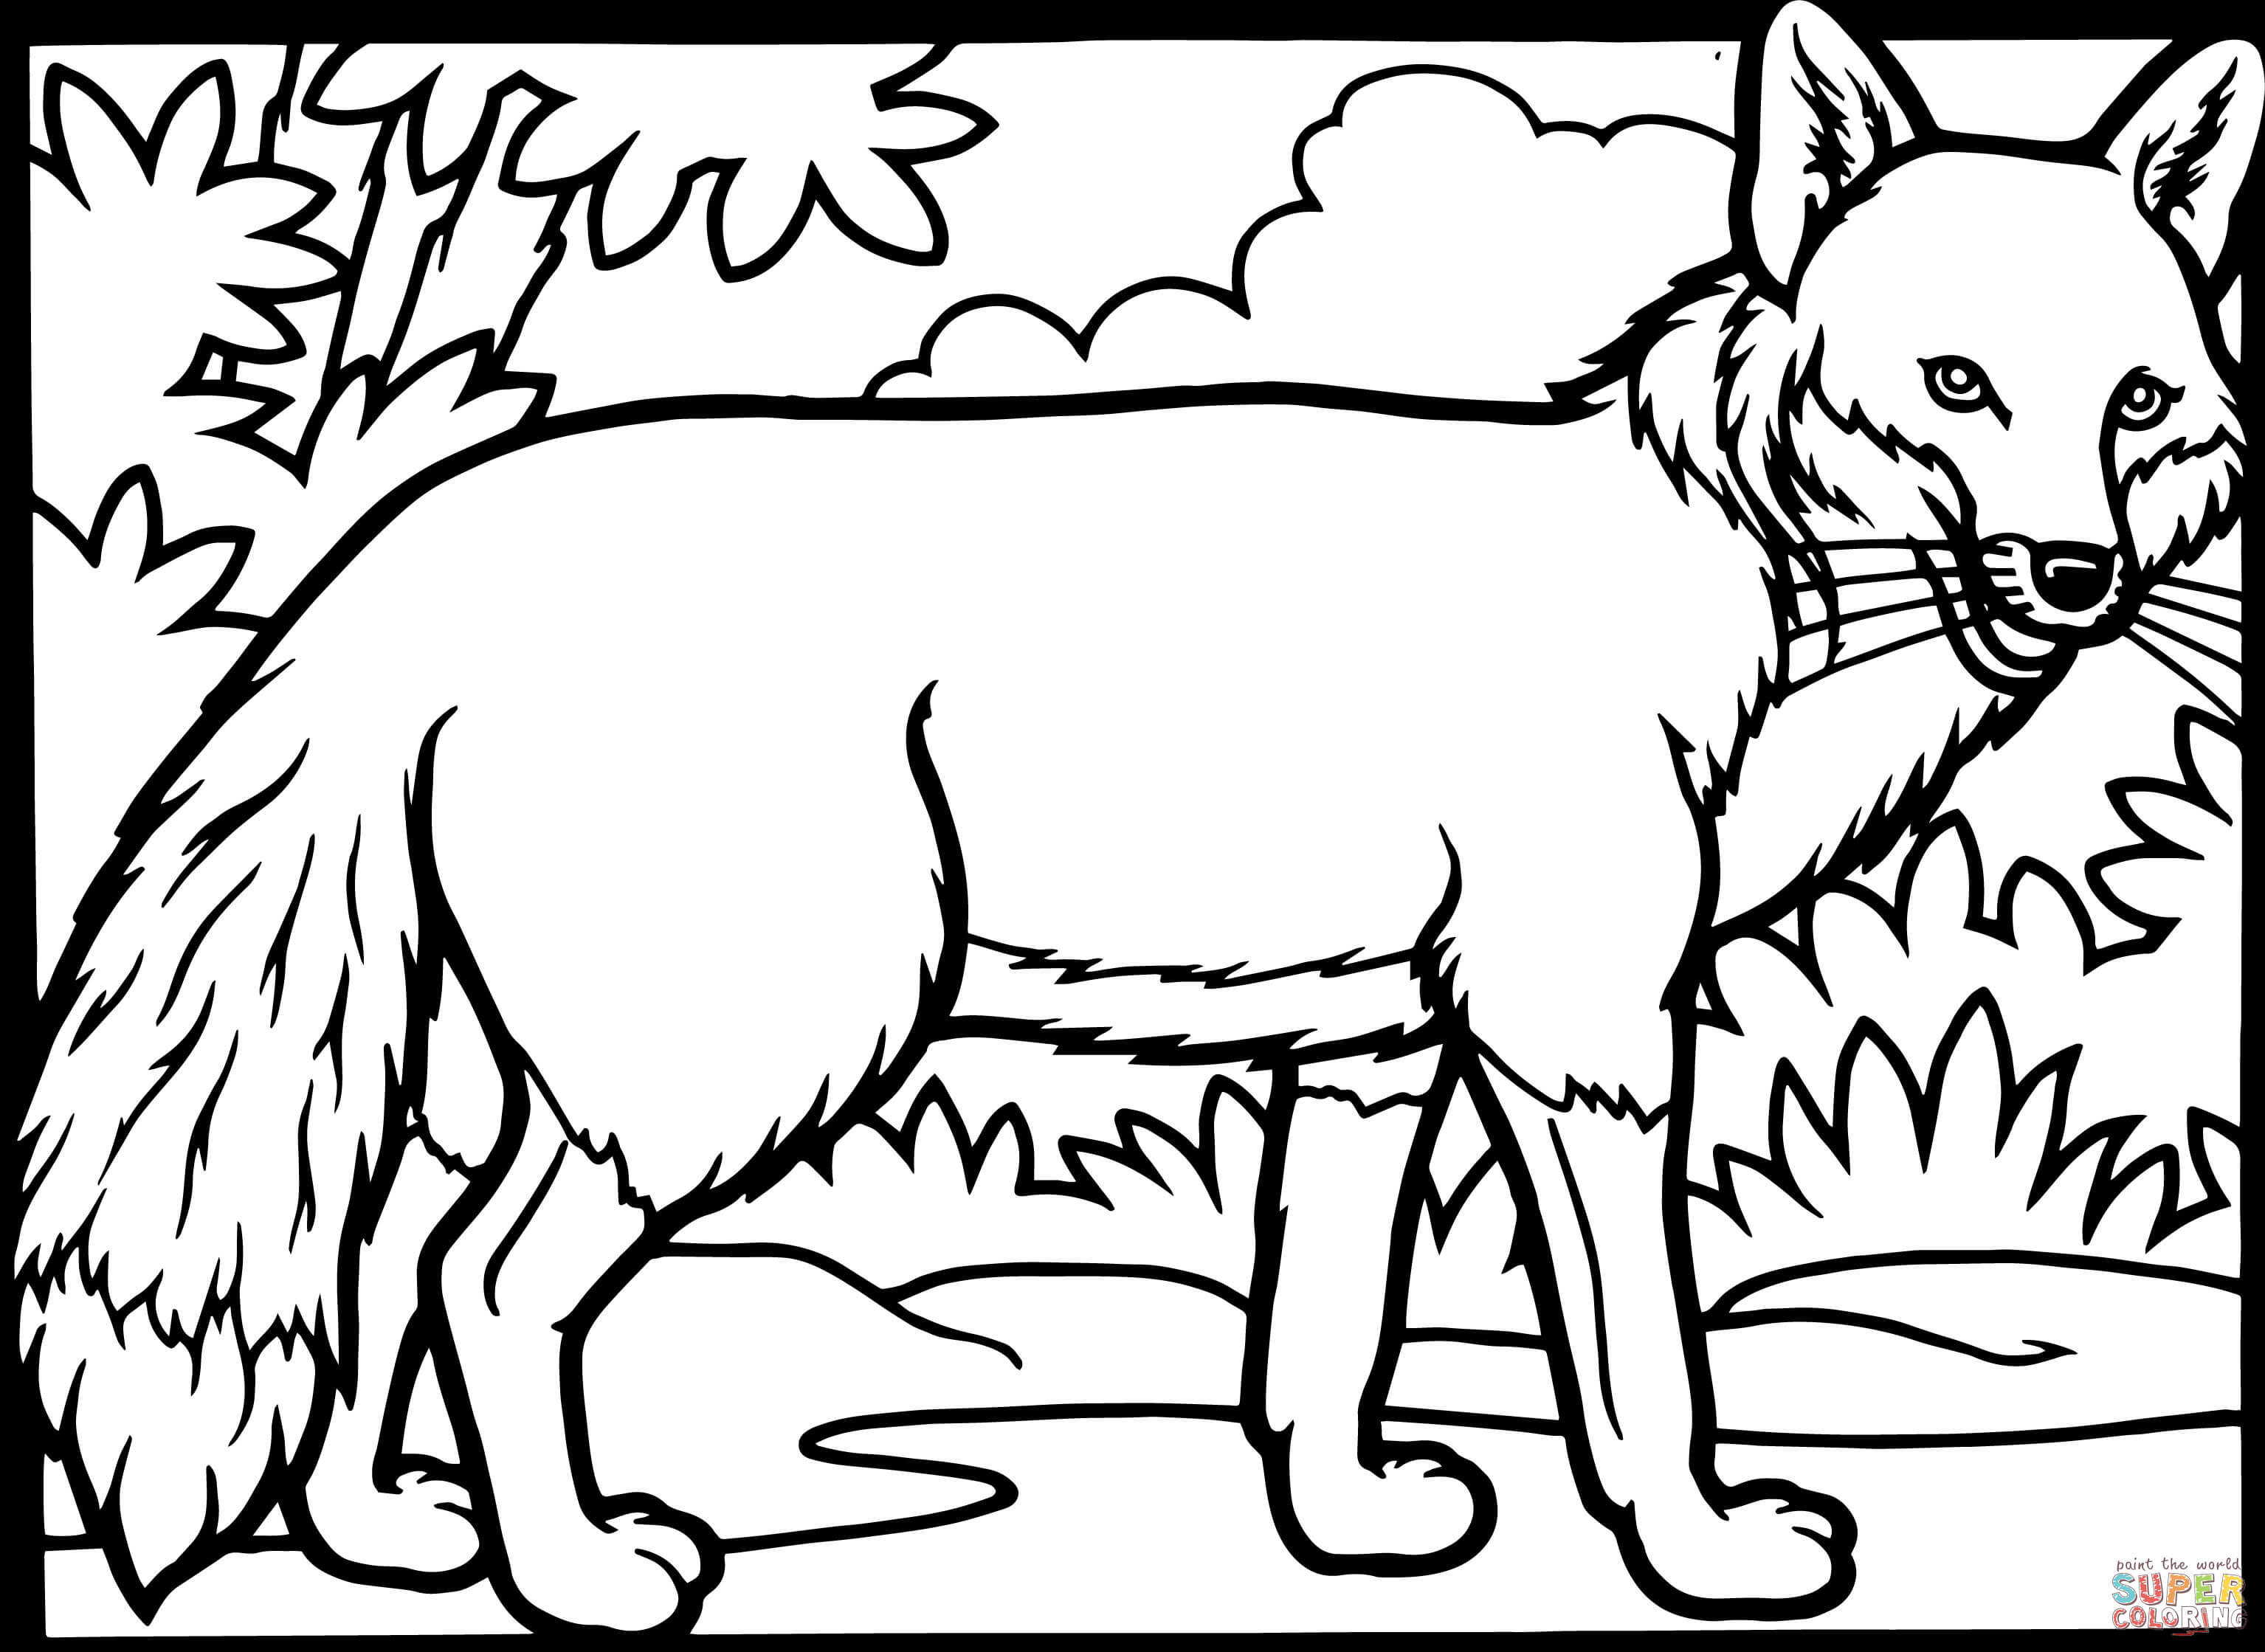 Red Fox coloring page | Free Printable Coloring Pages